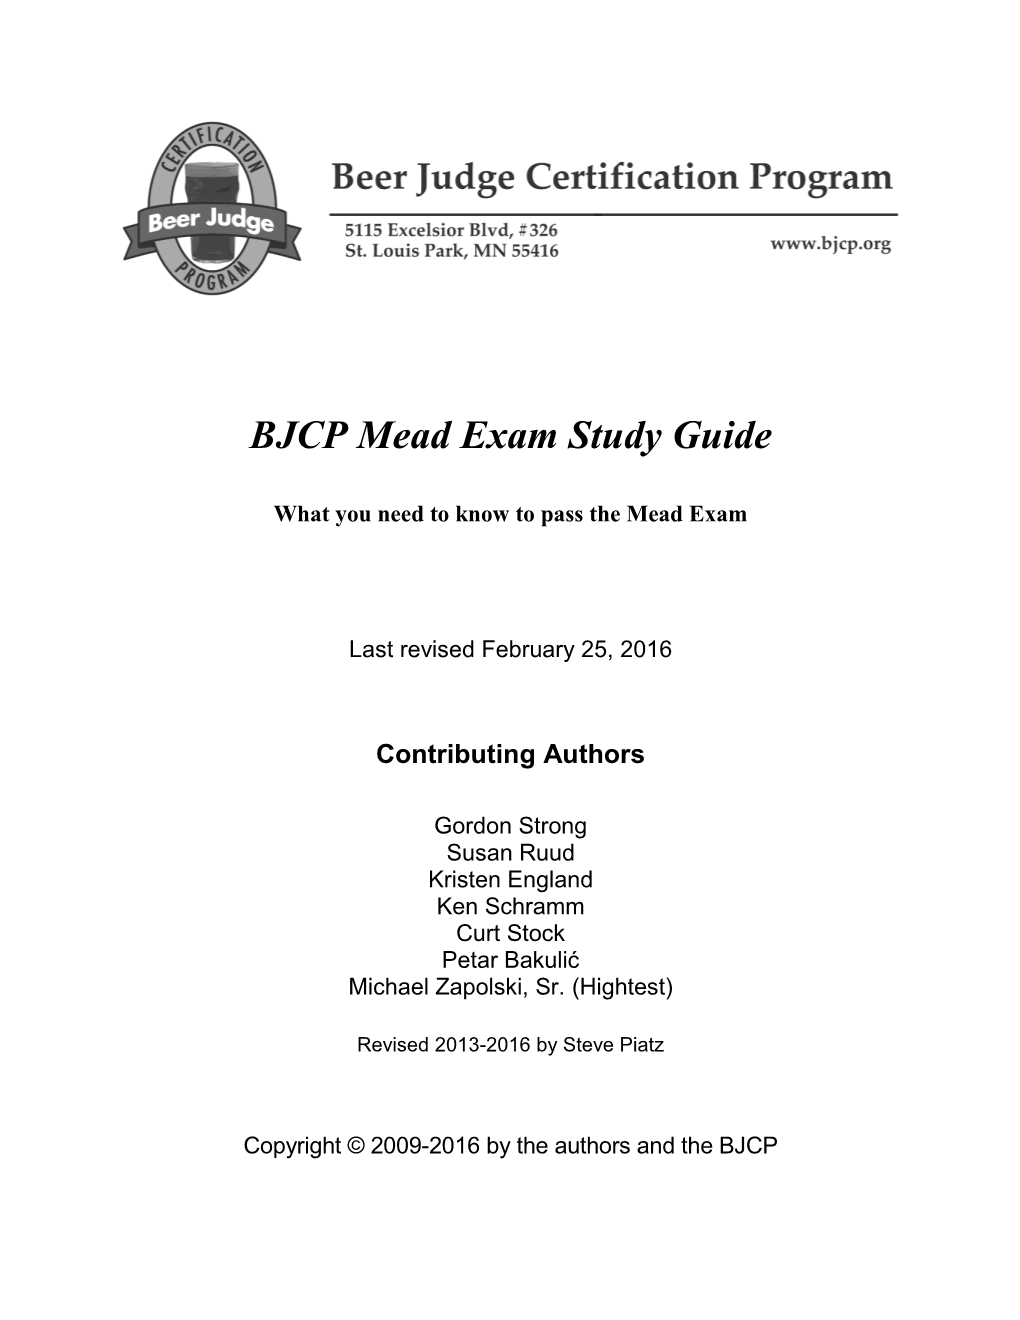 BJCP Mead Exam Study Guide